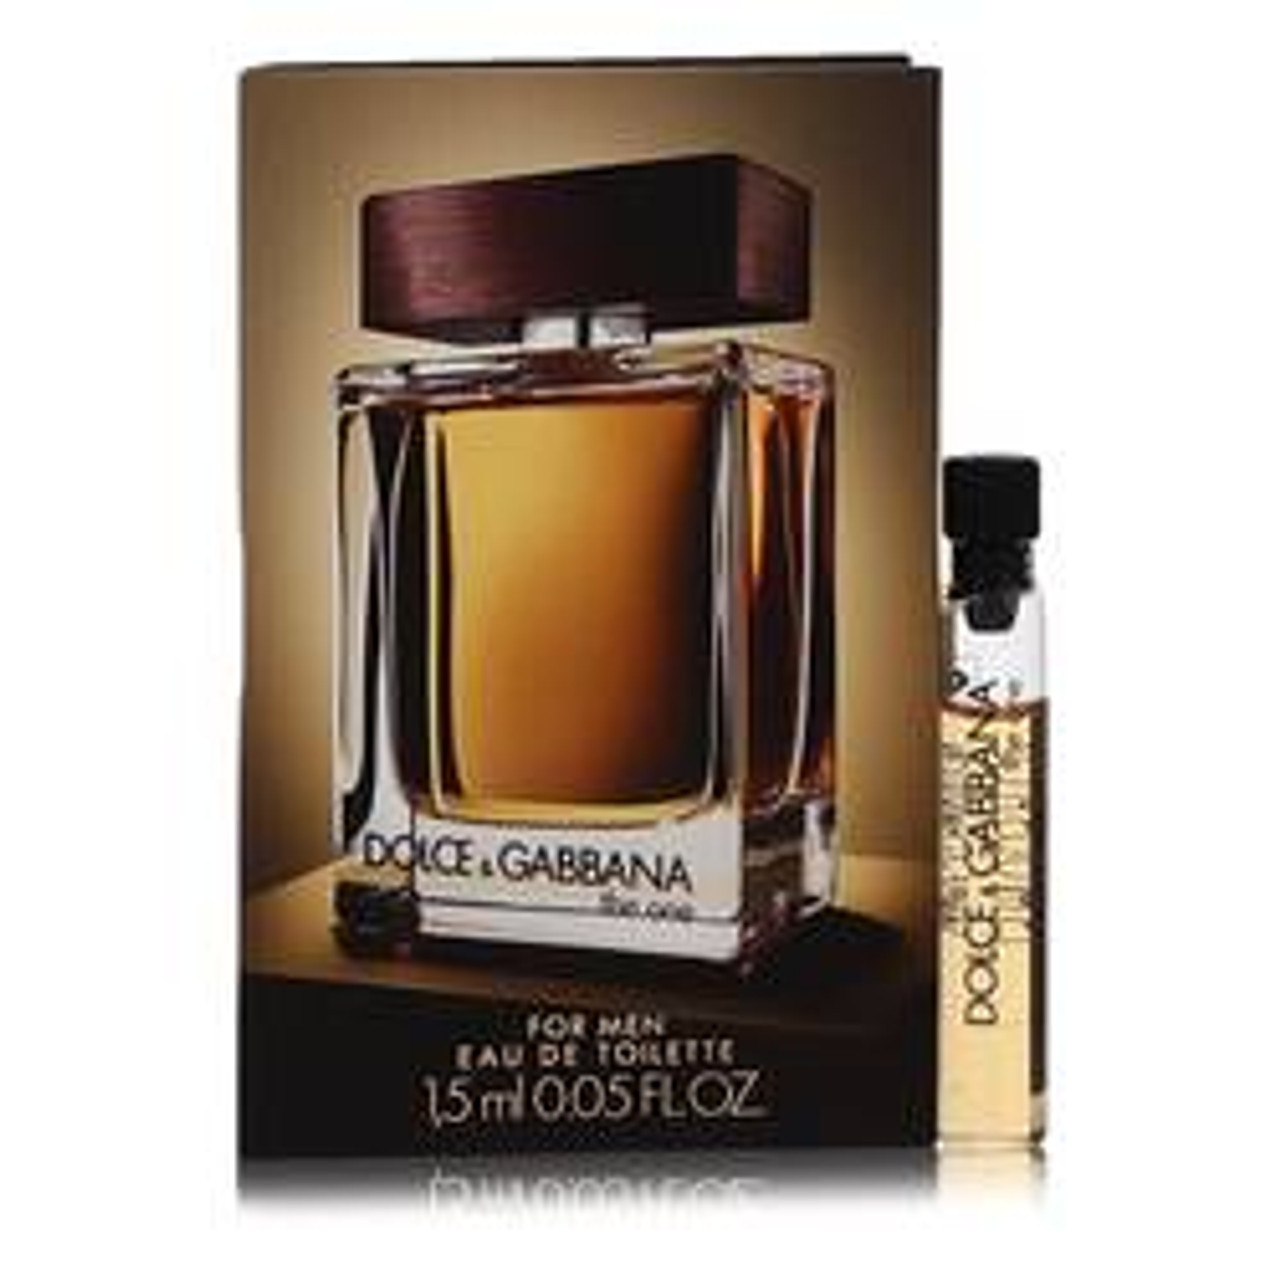 The One Cologne By Dolce & Gabbana Vial (sample) 0.05 oz for Men - [From 7.00 - Choose pk Qty ] - *Ships from Miami